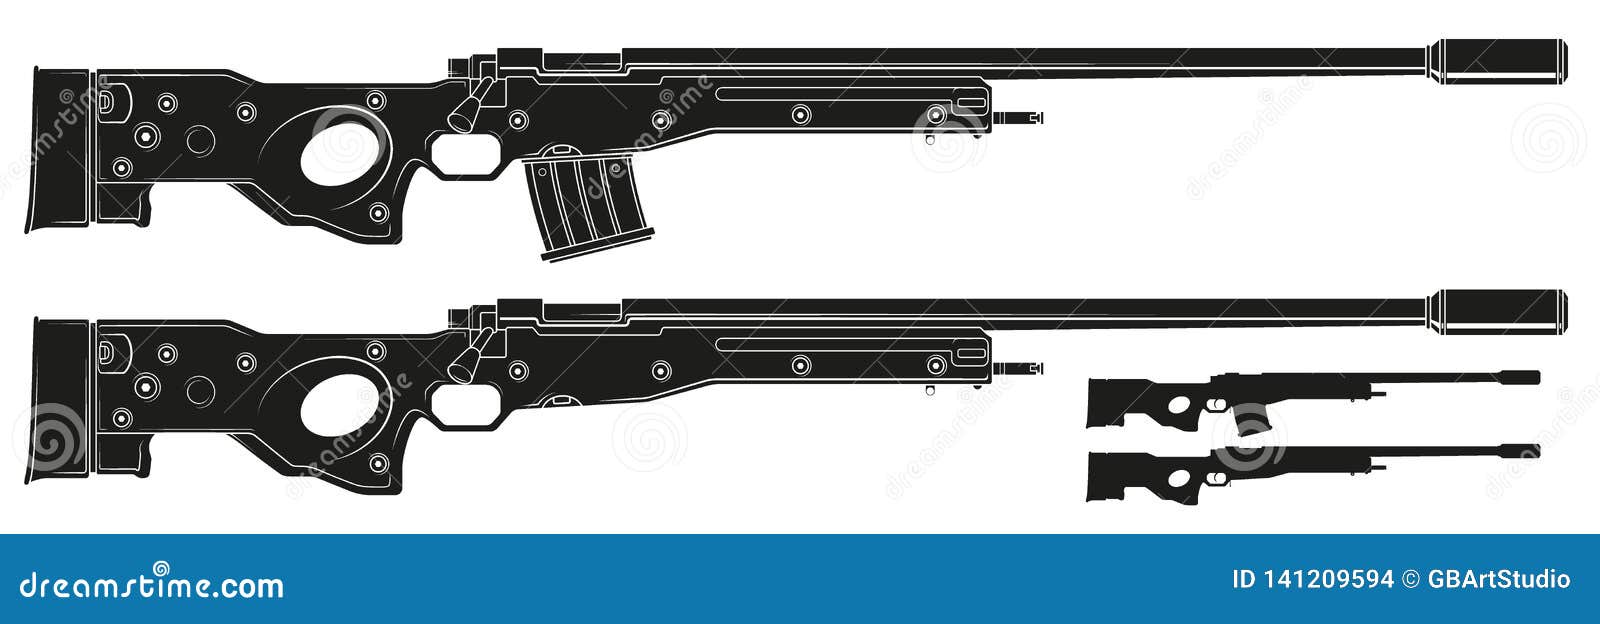 graphic silhouette sniper rifle with ammo clip